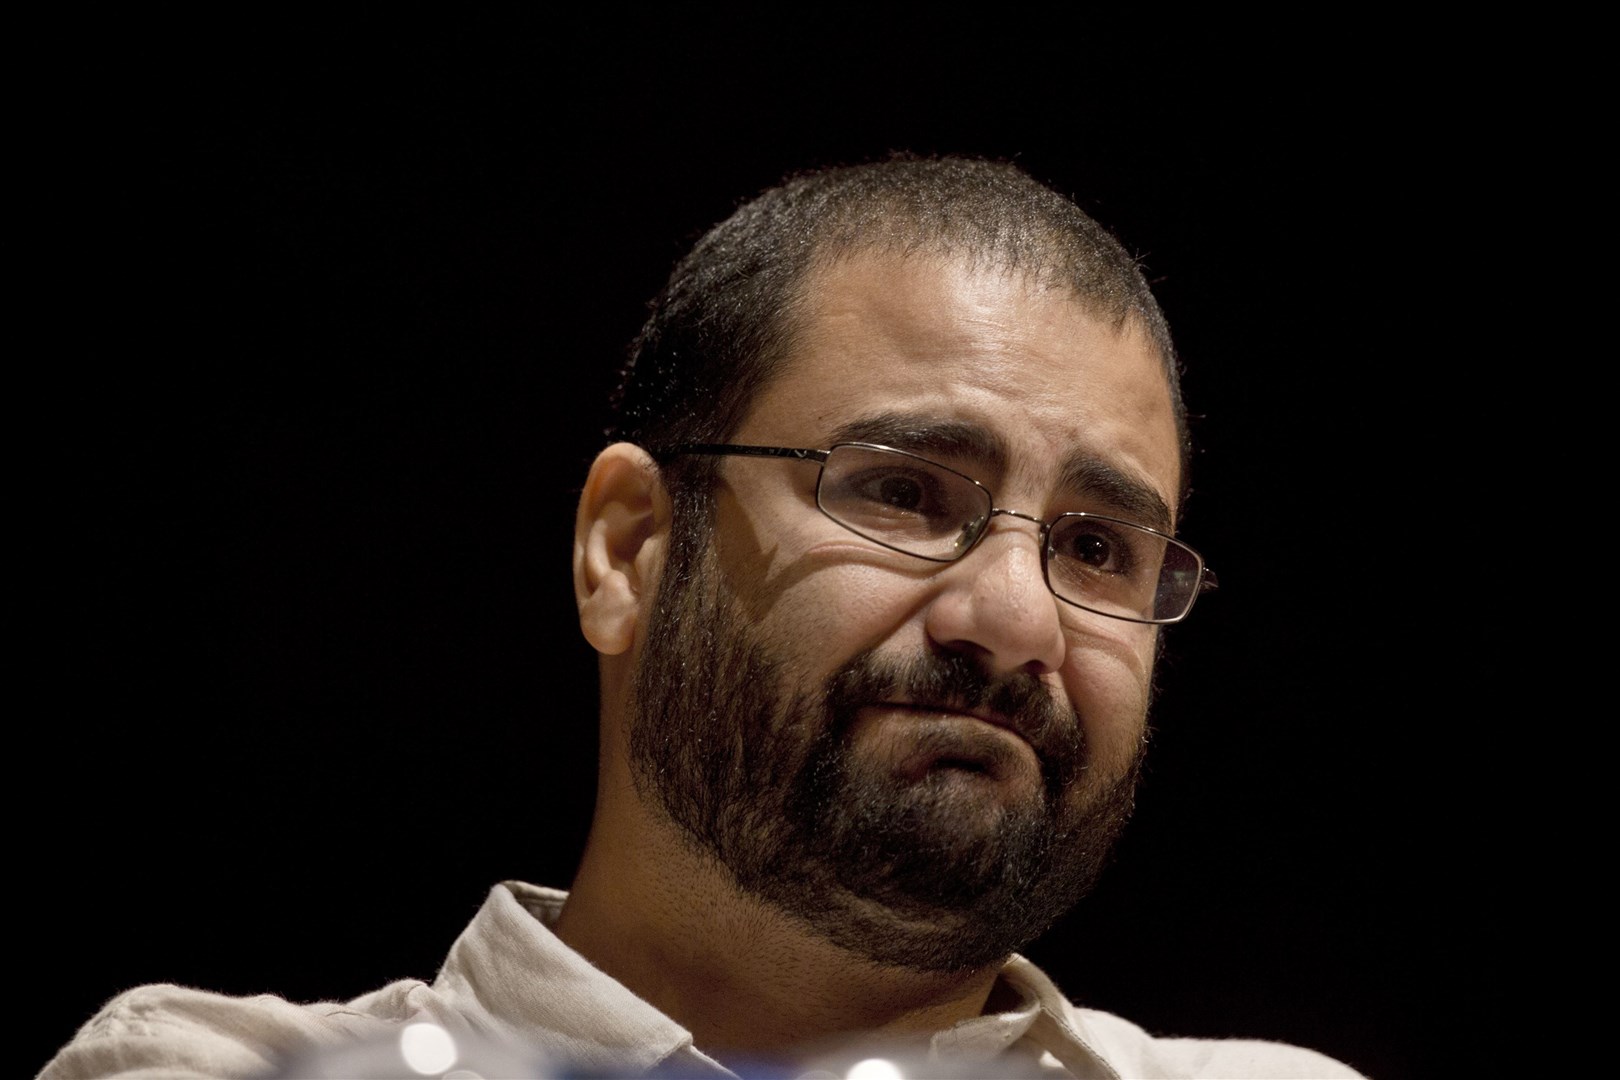 Alaa Abd El-Fattah who is now refusing water in protest at his detention in Egypt (Nariman El-Mofty/AP/PA)